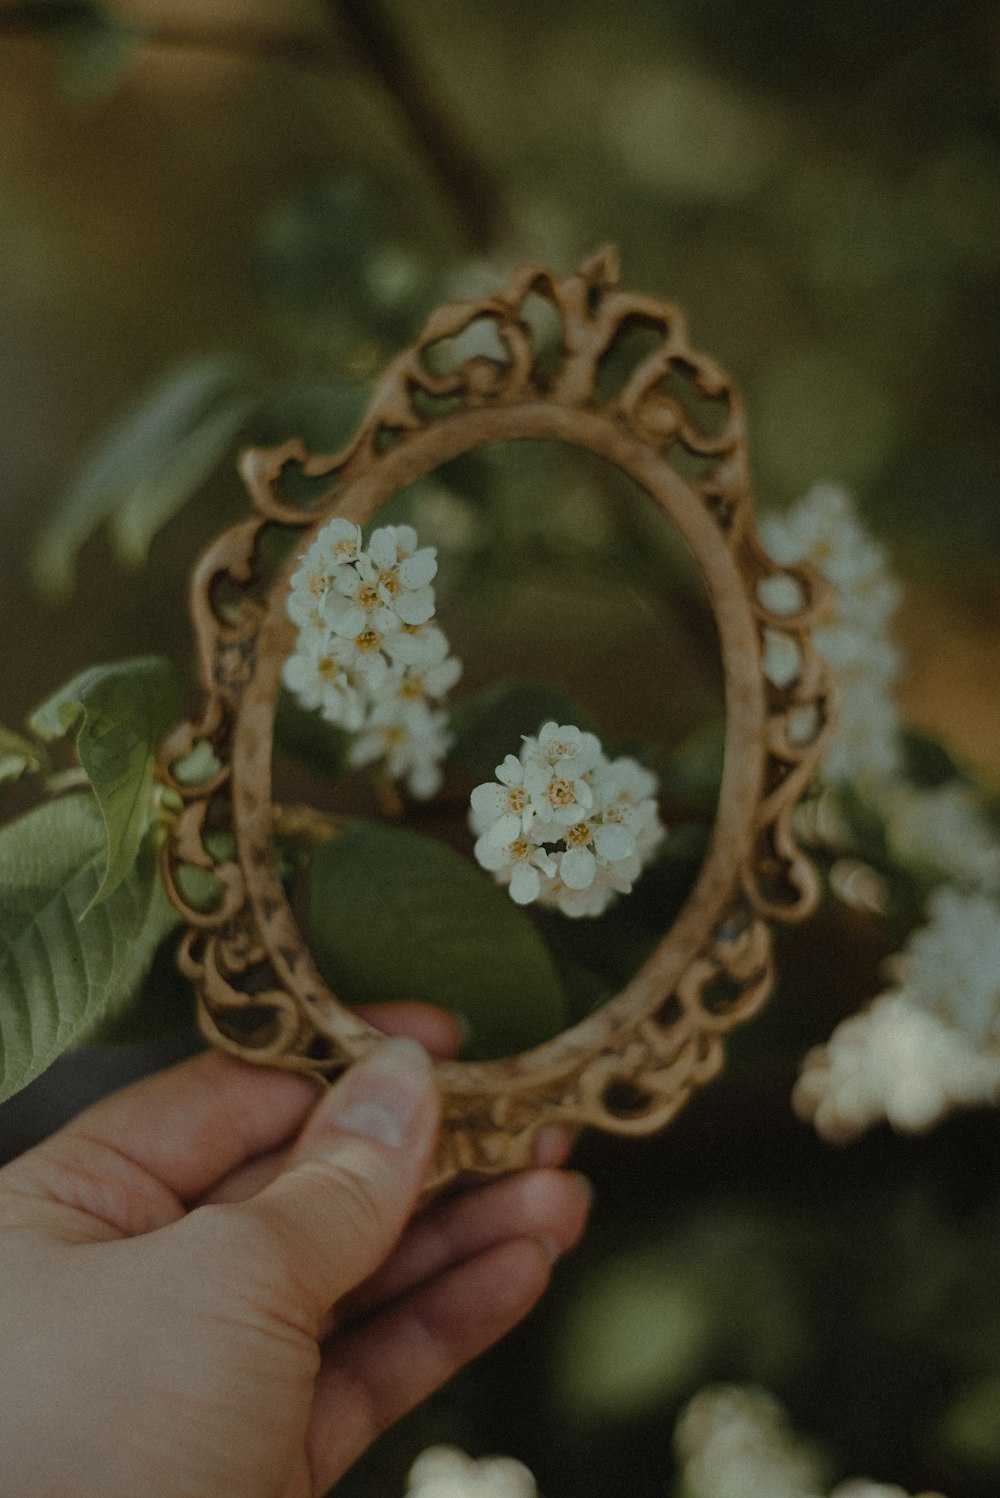 a person holding a small mirror with flowers in it